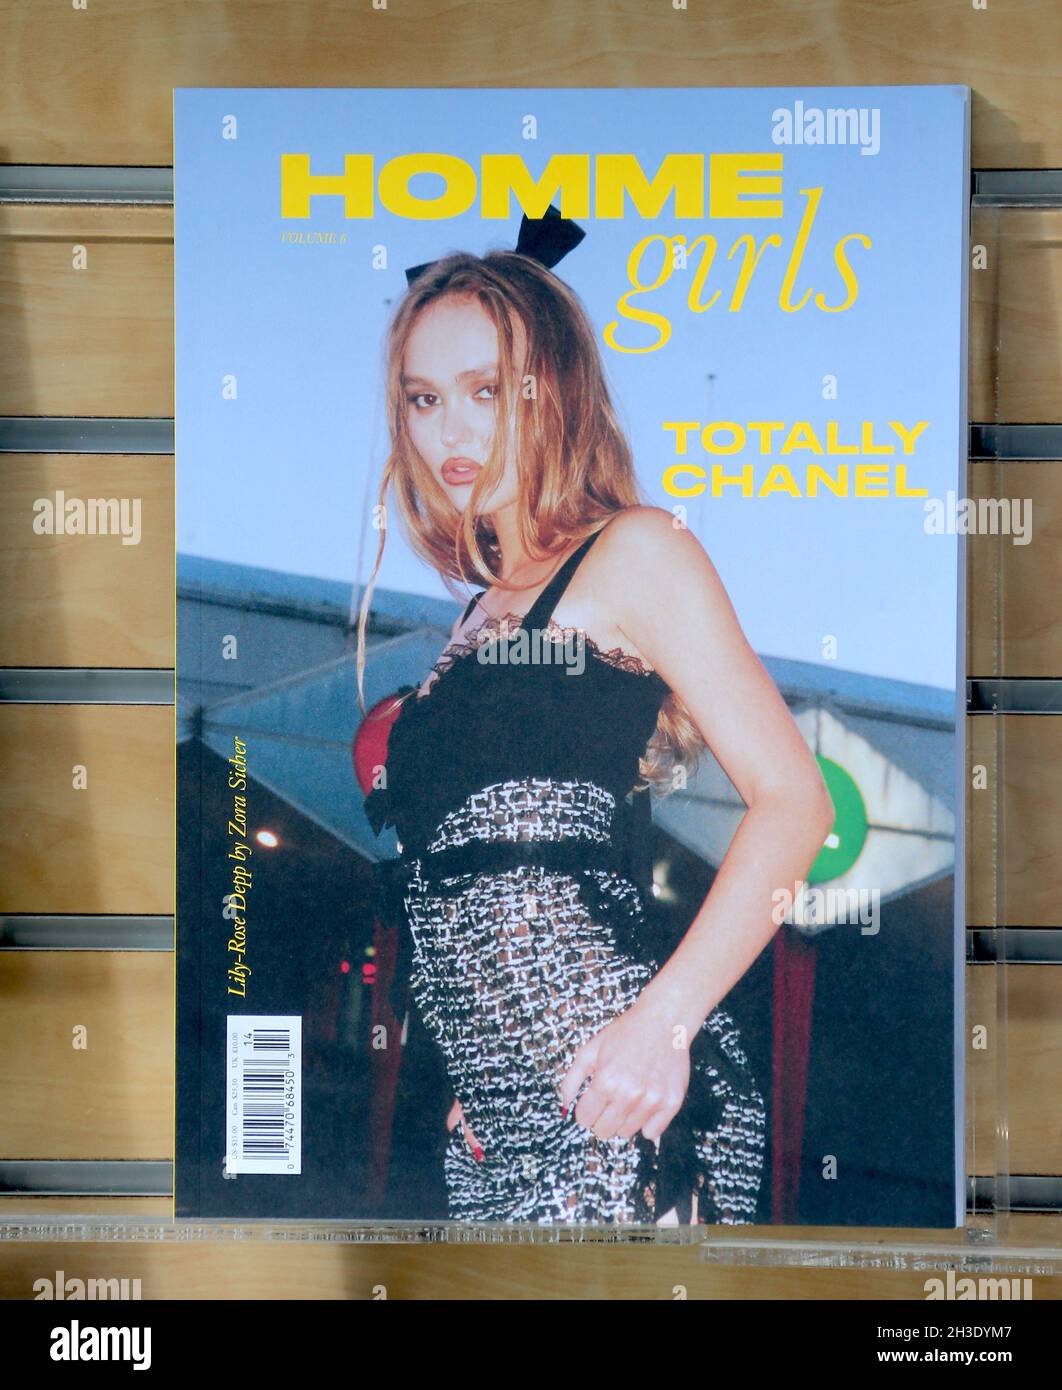 Fashion magazine Homme Girls covers Volume 6 Totally Chanel with